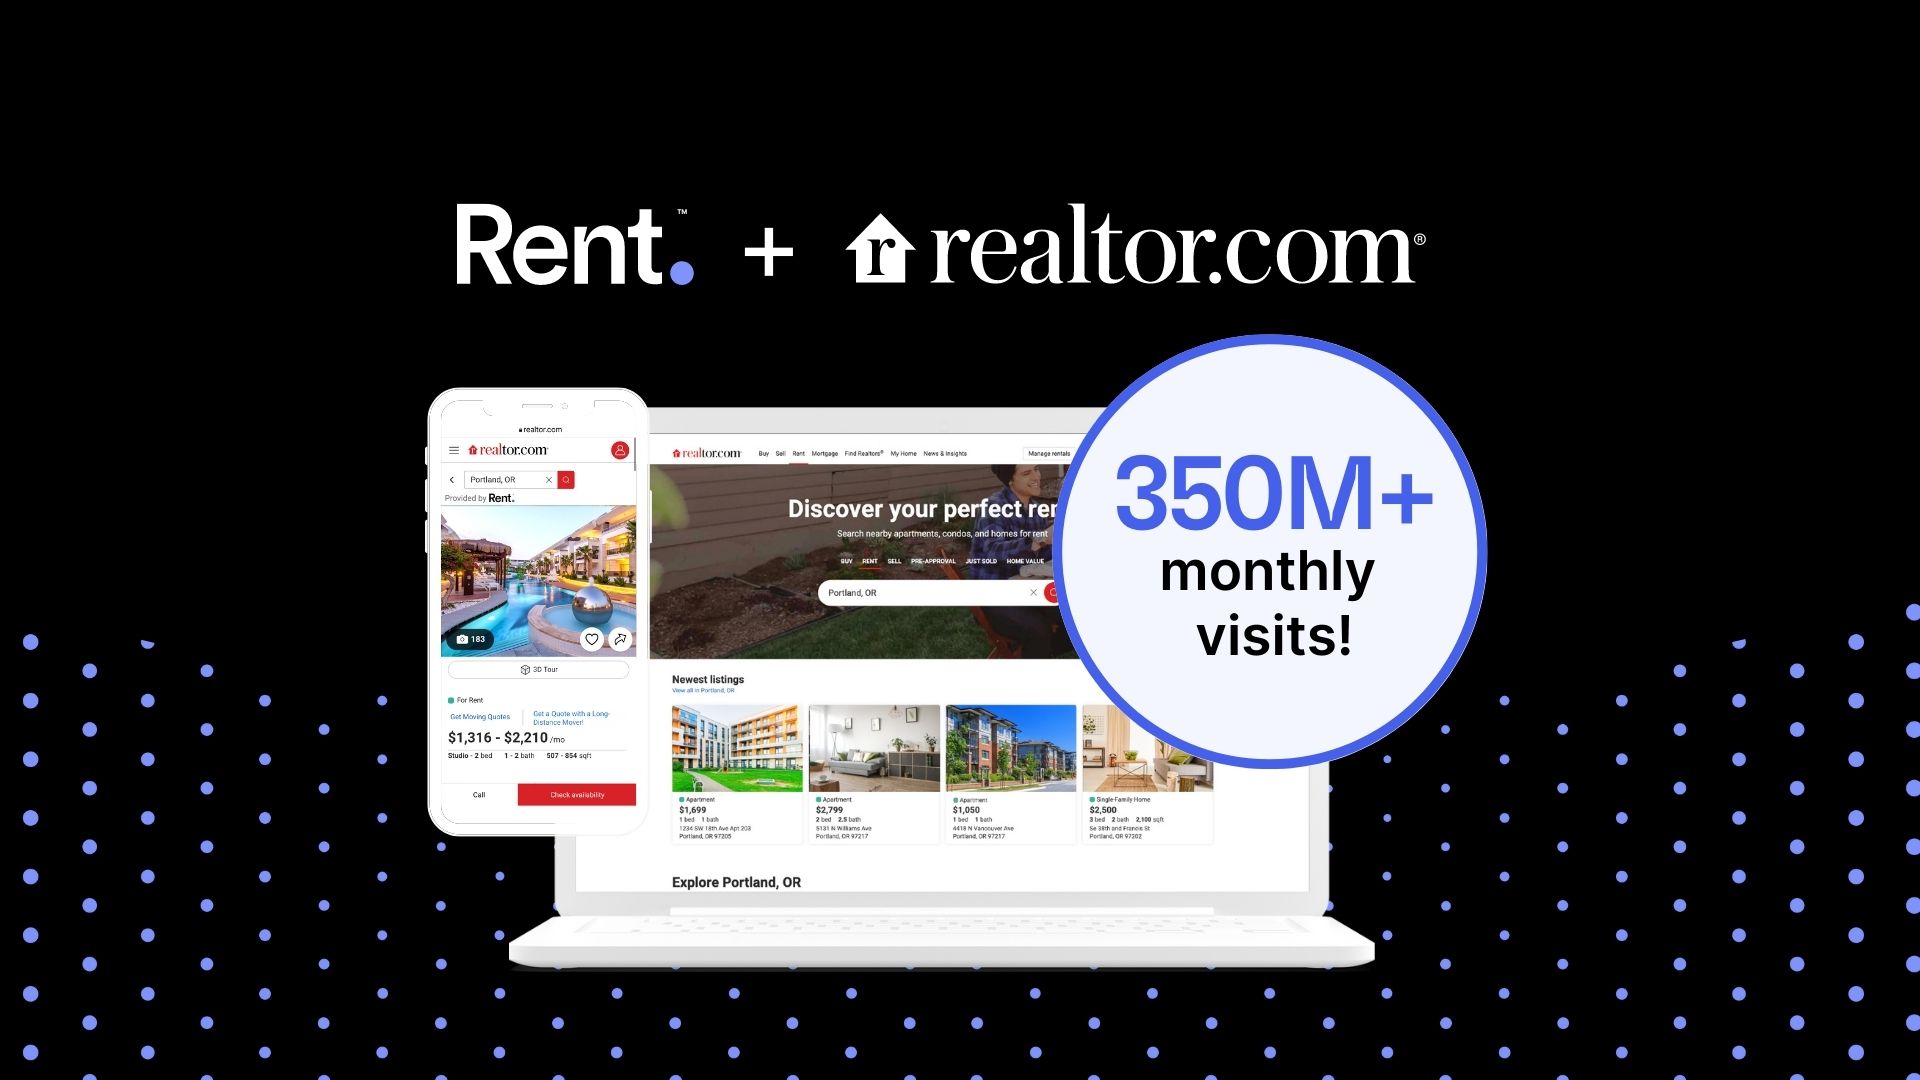 BusinessWire: Rent. Announces Strategic Agreement to Expand Content Listings to Realtor.com®